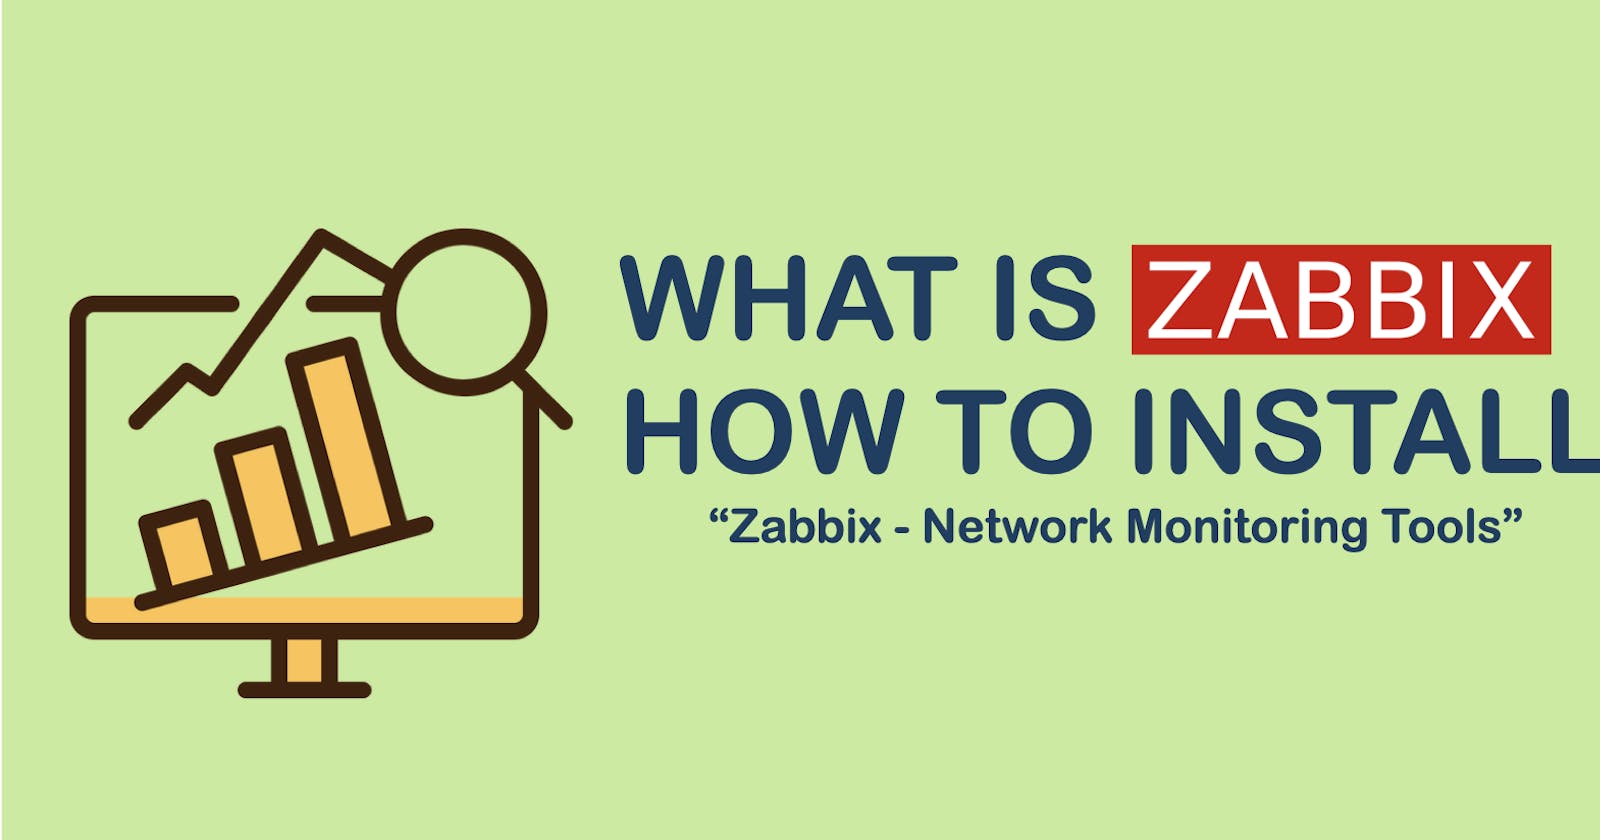 What is Zabbix Monitoring? How to Install it?